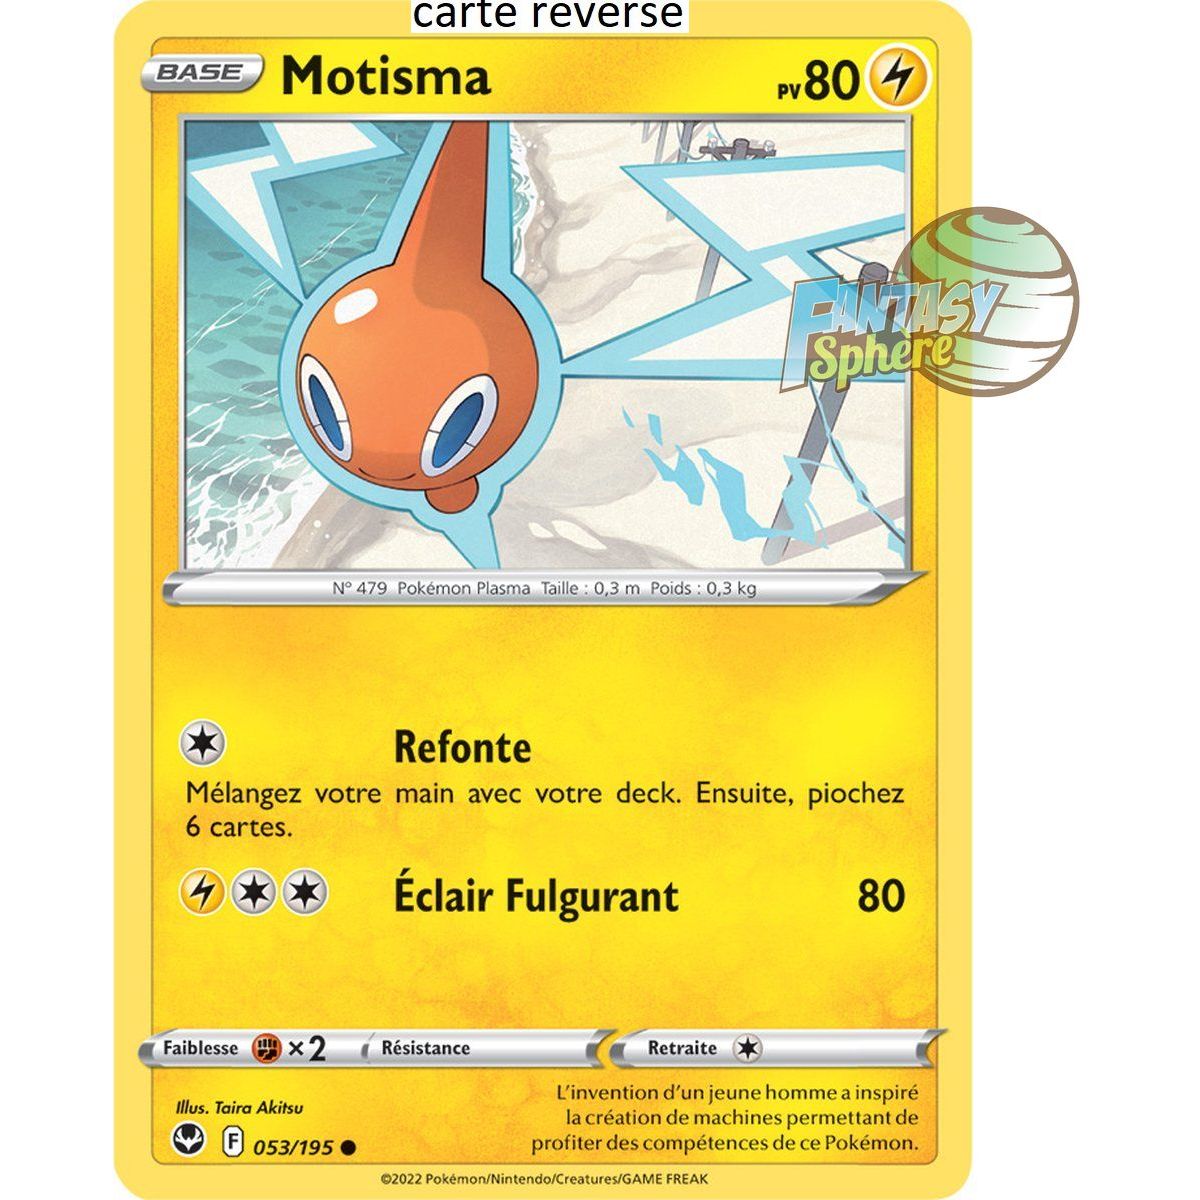 Rotom - Reverse 53/195 - Sword and Shield 12 Silver Storm